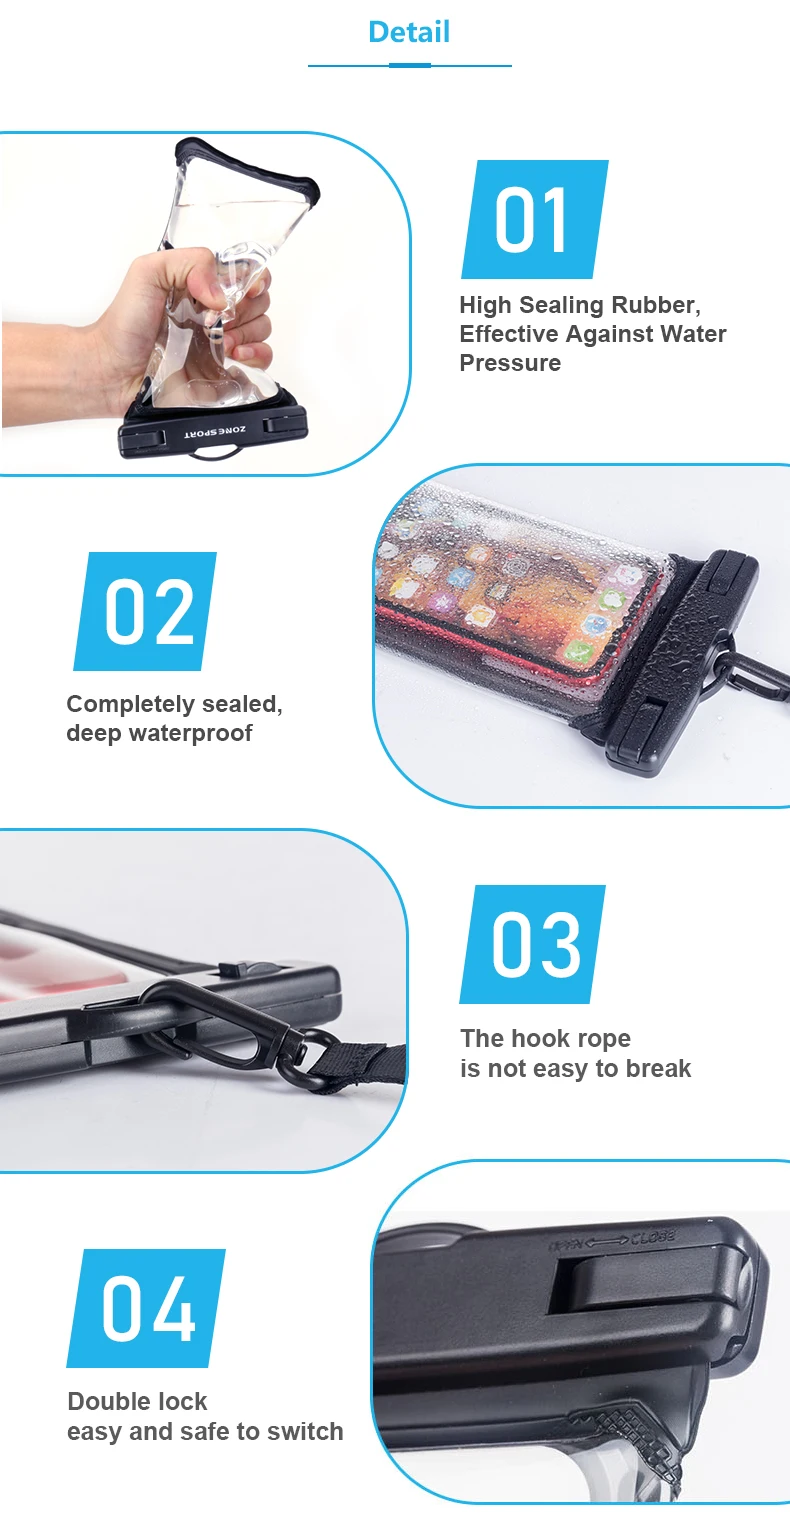 New Water Proof Mobile Phone Case PVC Waterproof Cell Phone Carry Bag for Phone Accessories